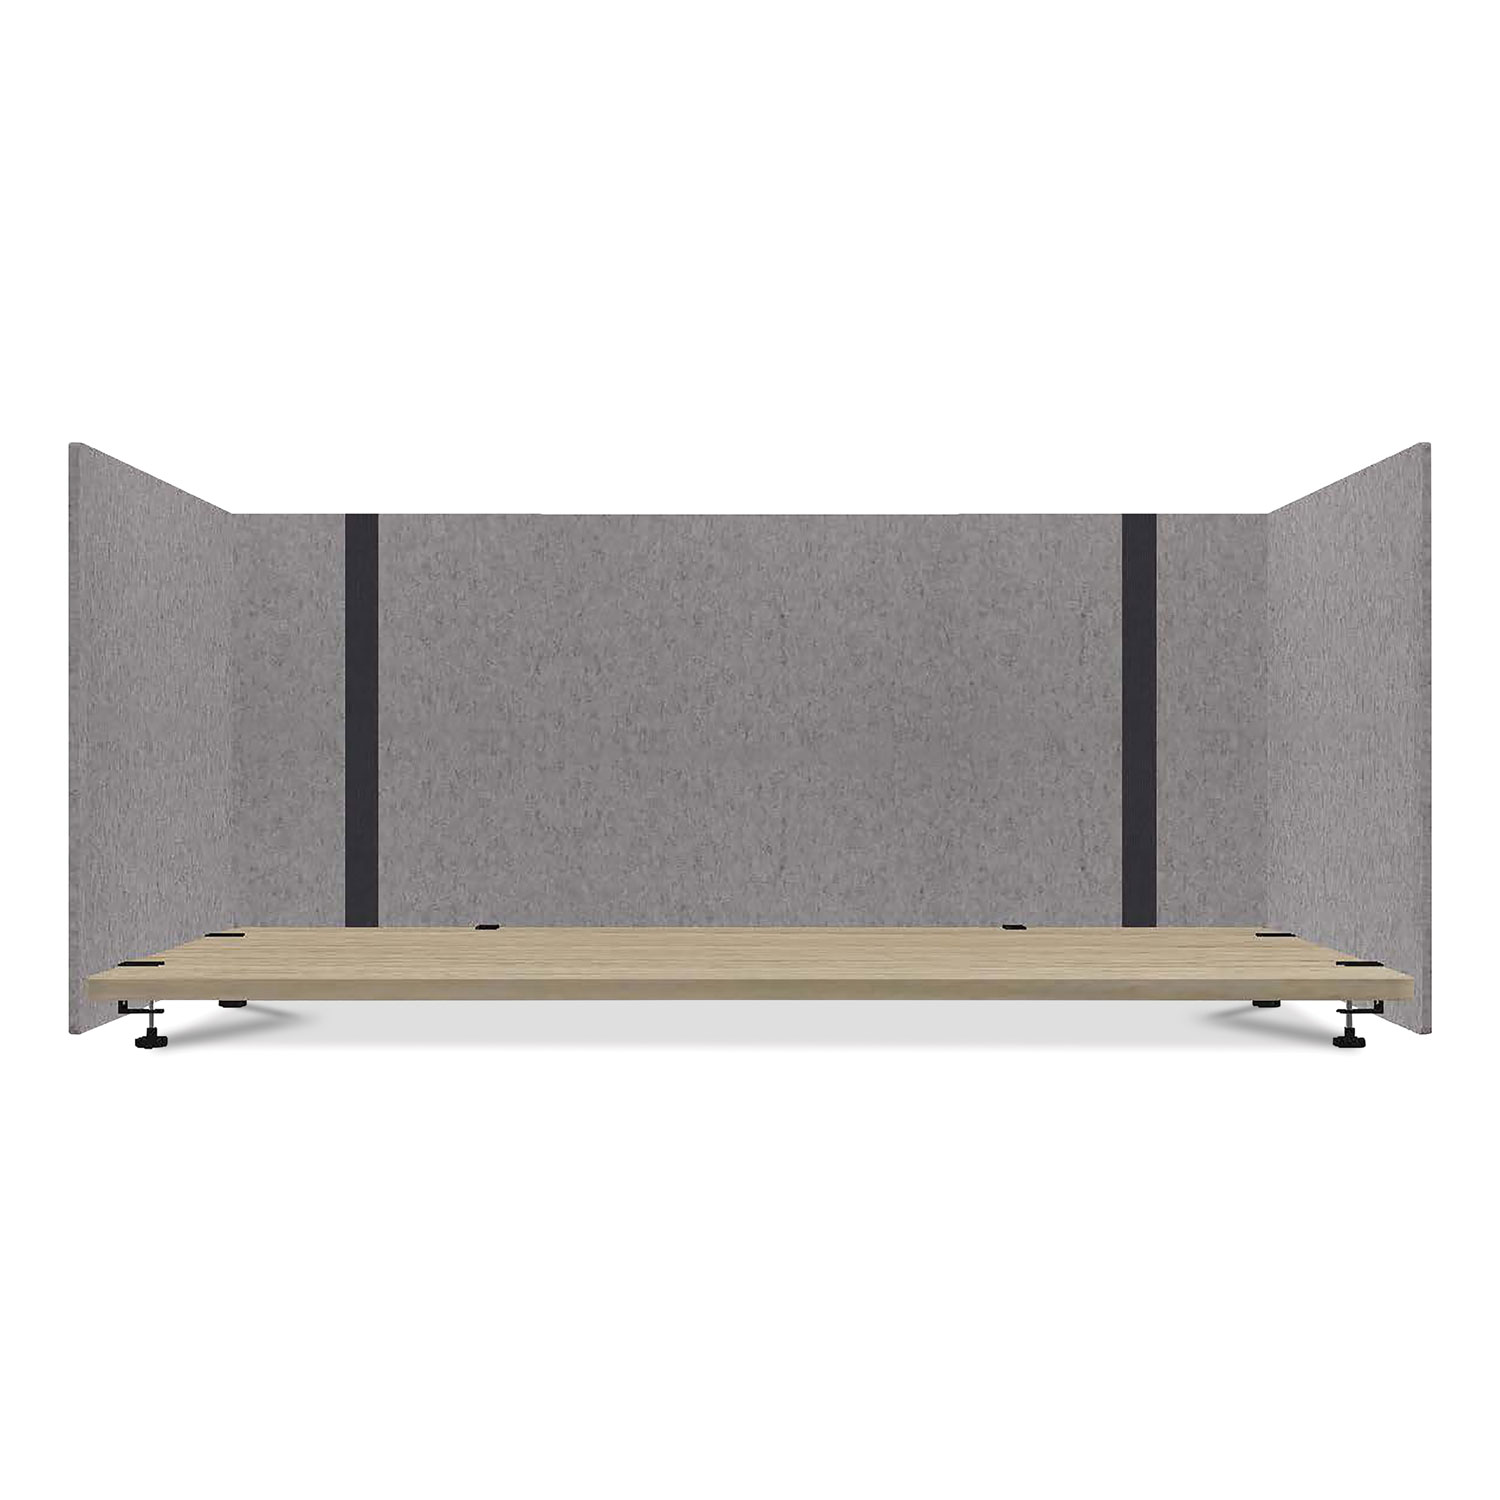  Lumeah LUAD48301G Adjustable Desk Screen with Returns, 48 to 78 x 29 x 26.5, Polyester, Gray (GN1LUAD48301G) 